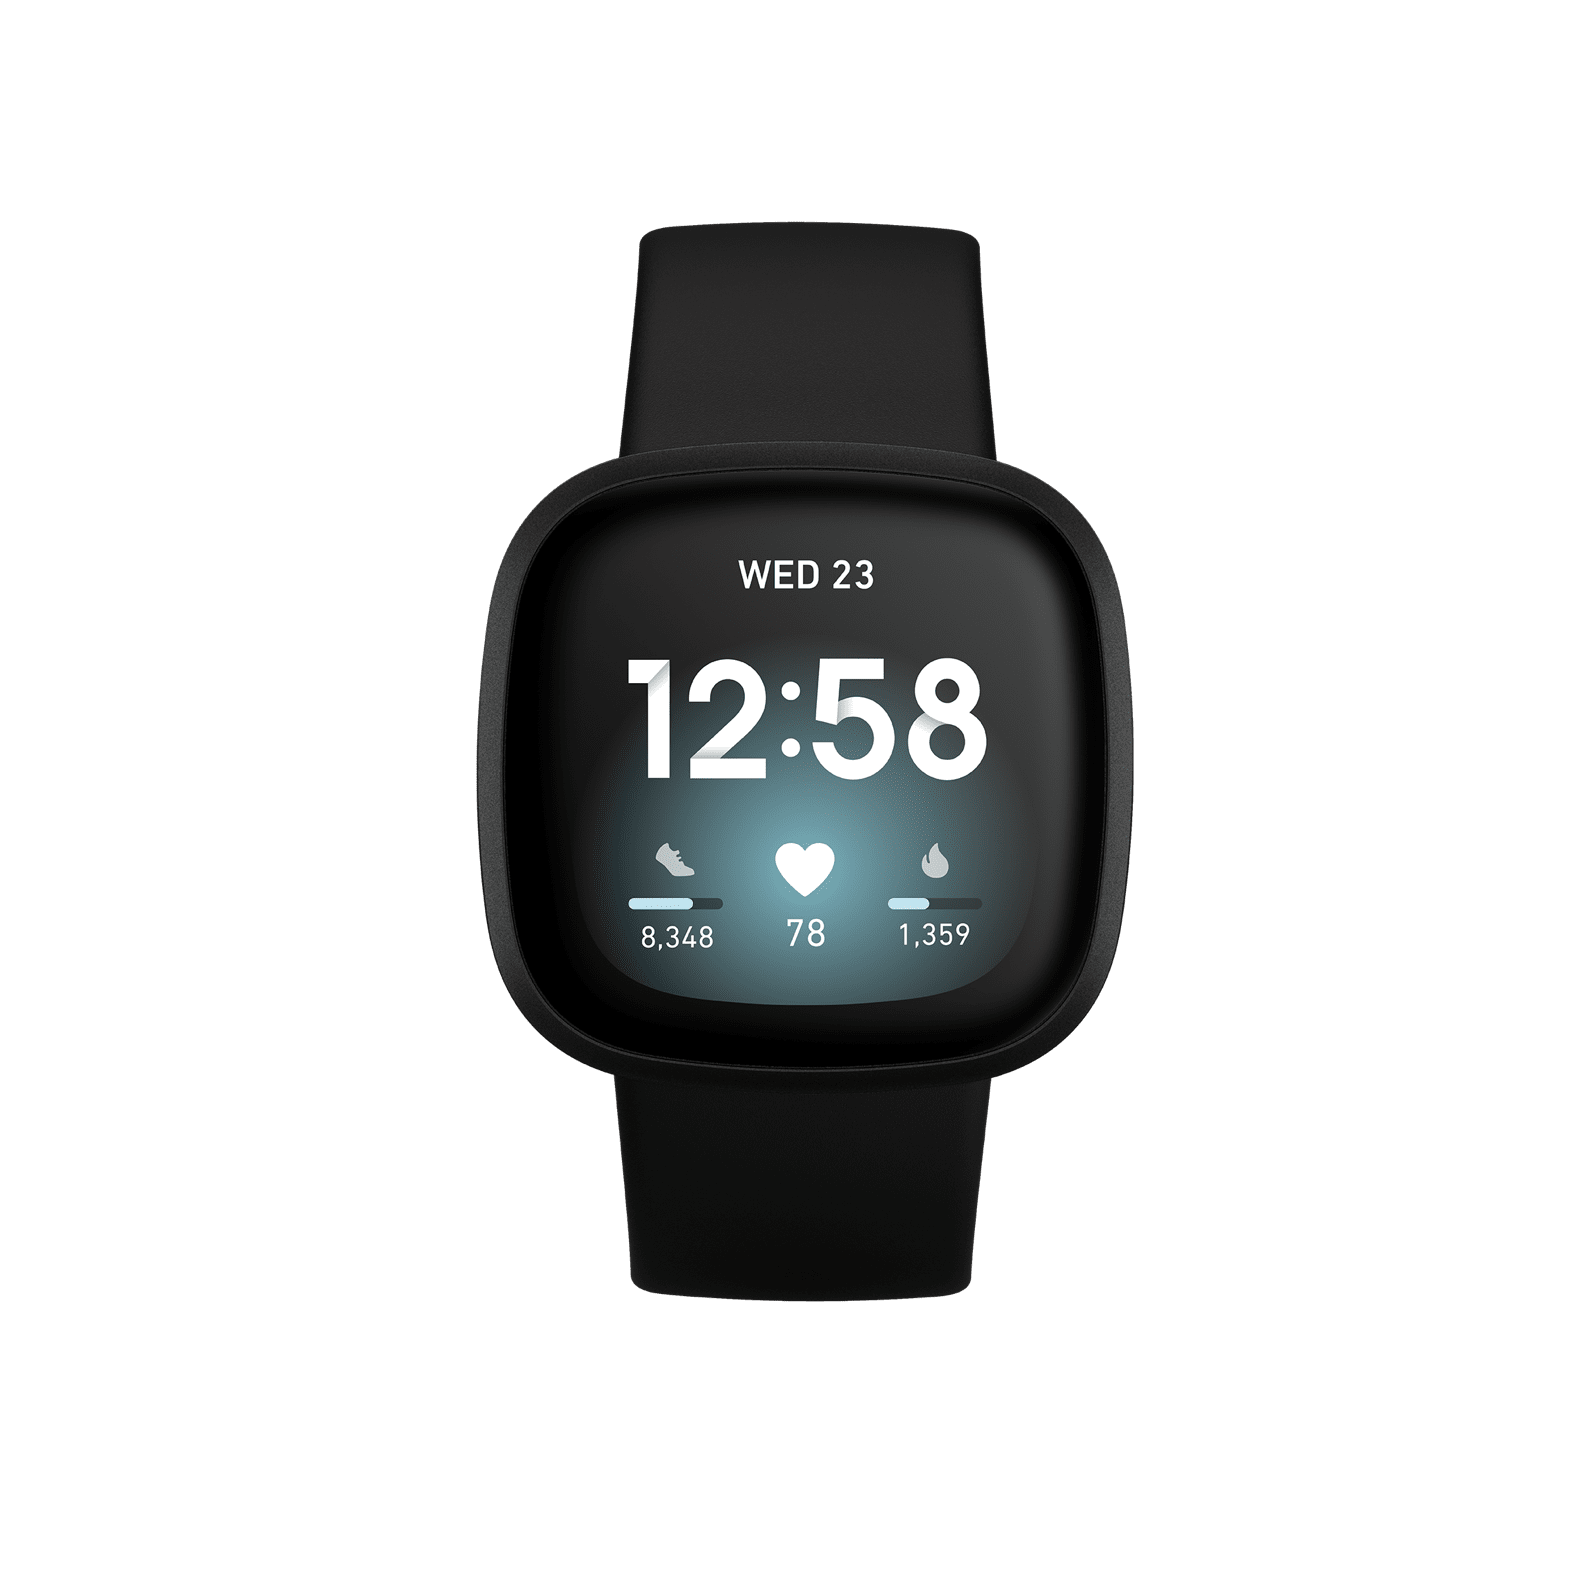 10 Best smartwatch for small wrist in 2022 - Android Smartwatches